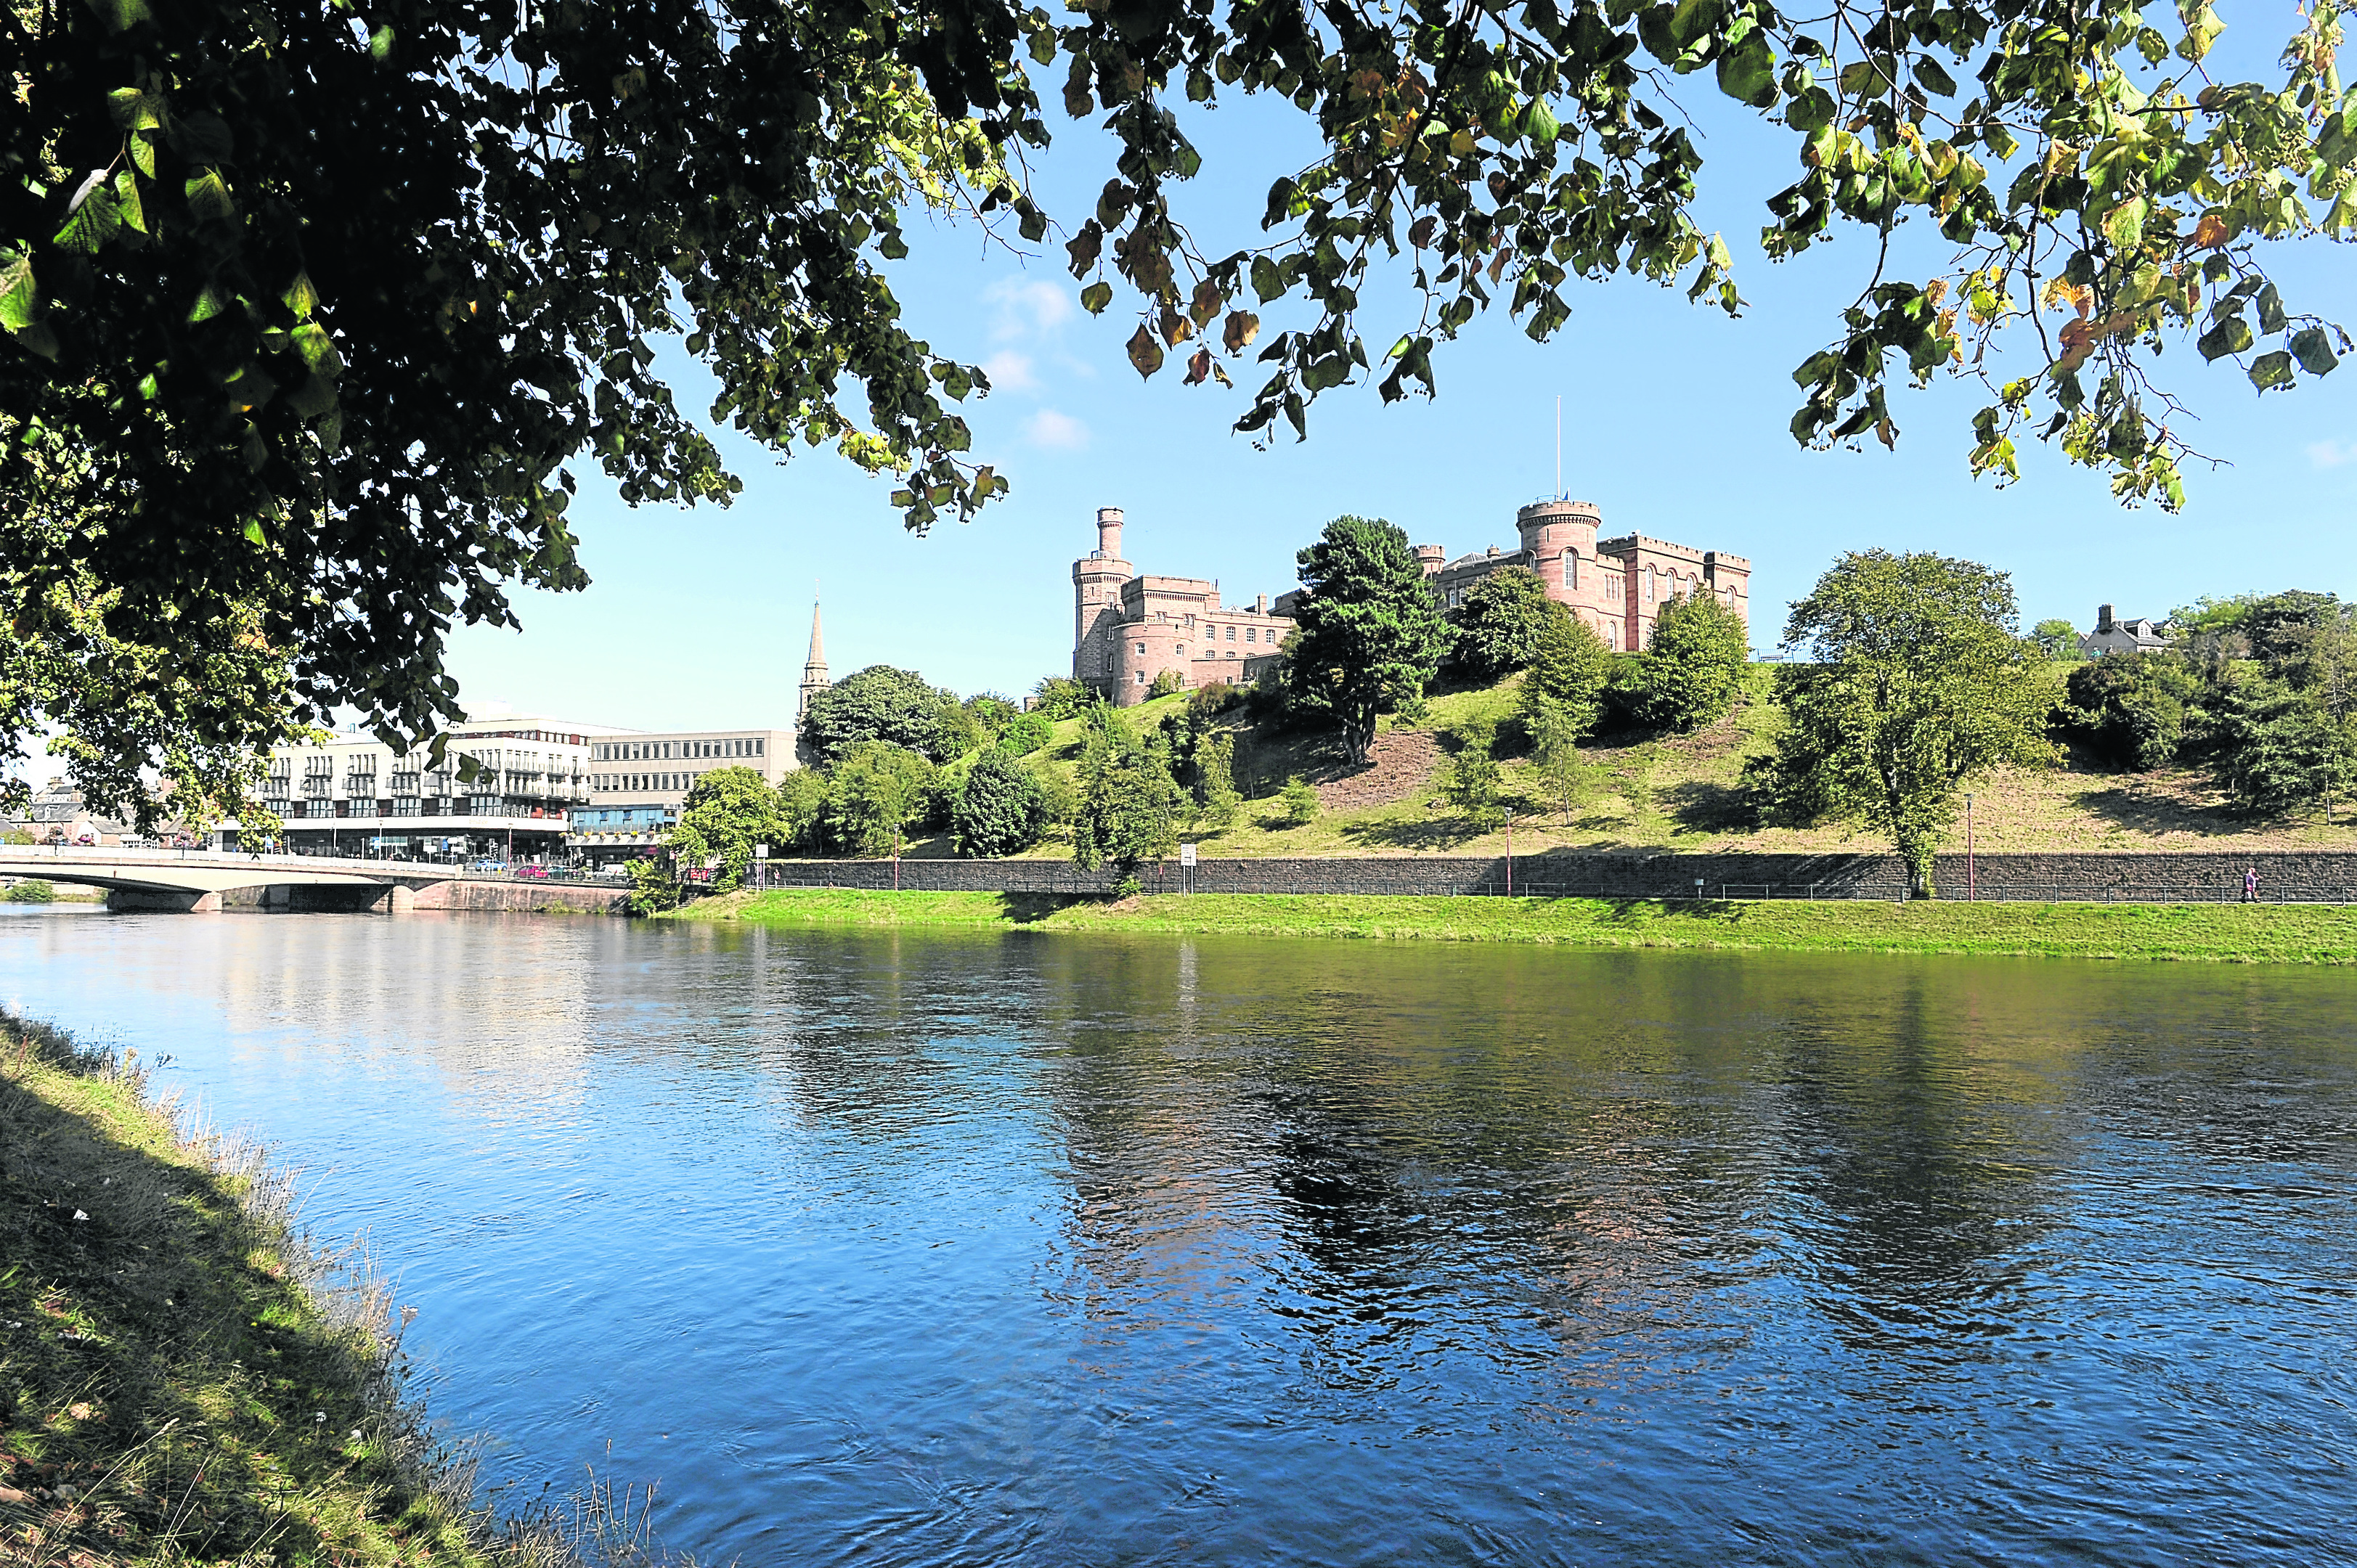 Inverness Castle with the River Ness in the foreground.